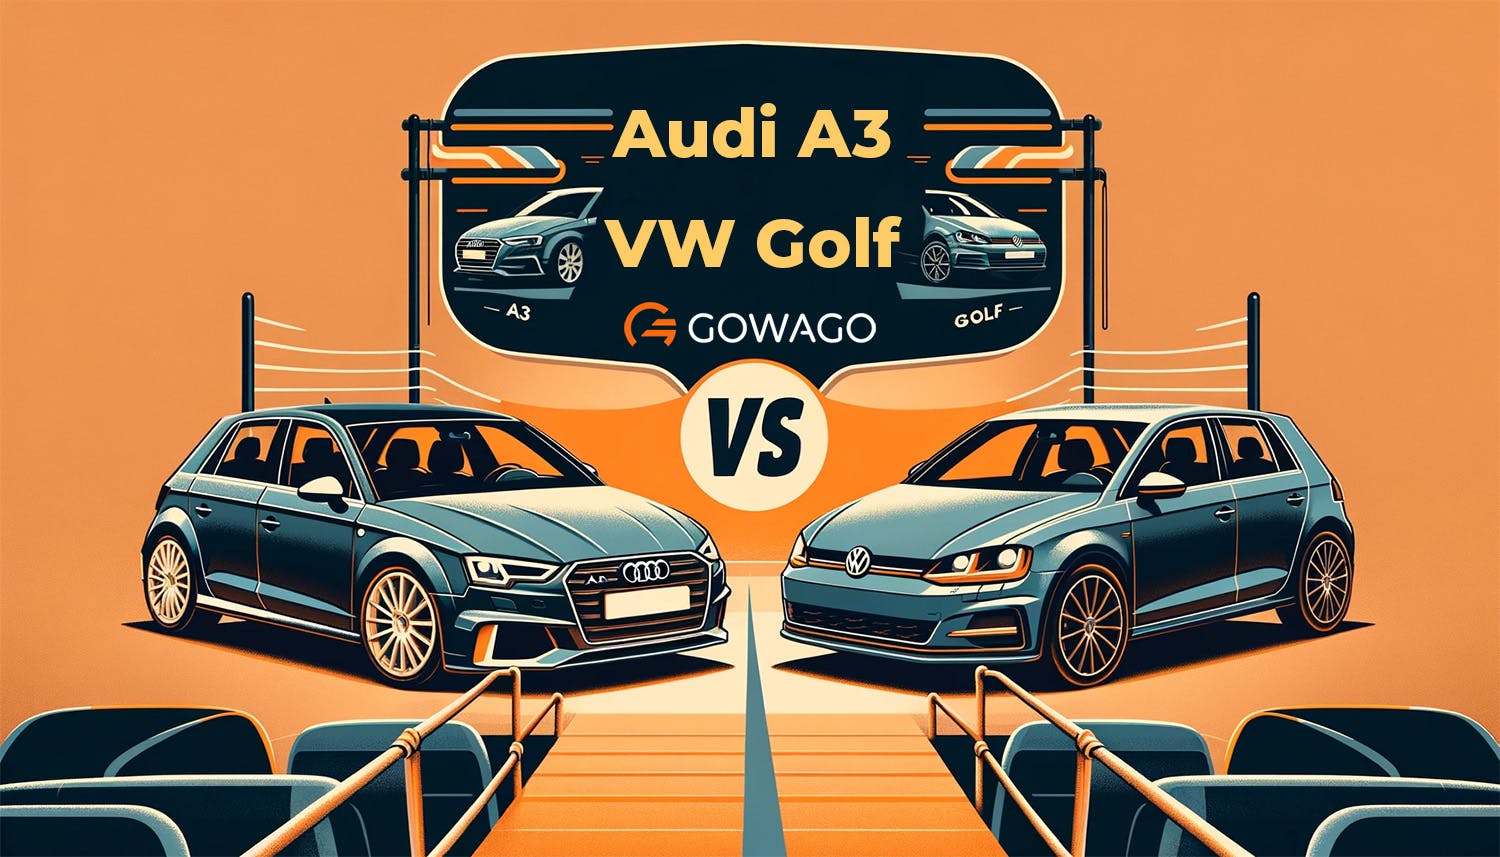 blog item card - A comparison between the Audi A3 and the VW Golf - Which one should you lease? Do you want premium sportiness or a down-to-earth car? gowago gives you the answers